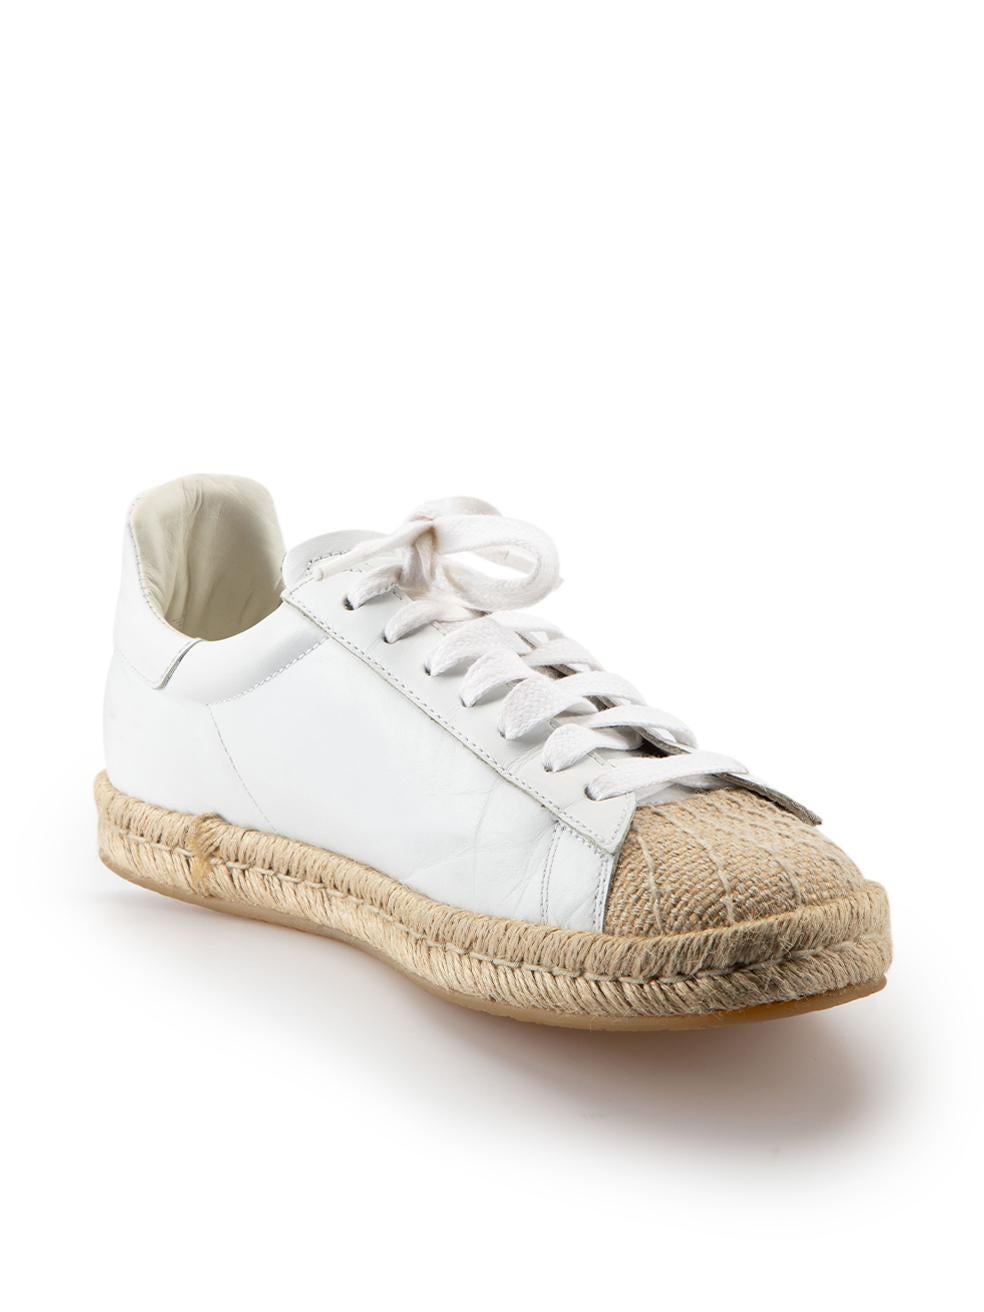 CONDITION is Good. General wear to trainers is evident. Moderate signs of wear to upper with clear marks seen on the quarters and heels, mild creasing also found throughout and slight discolouration noticeable on the laces of this used Alexander